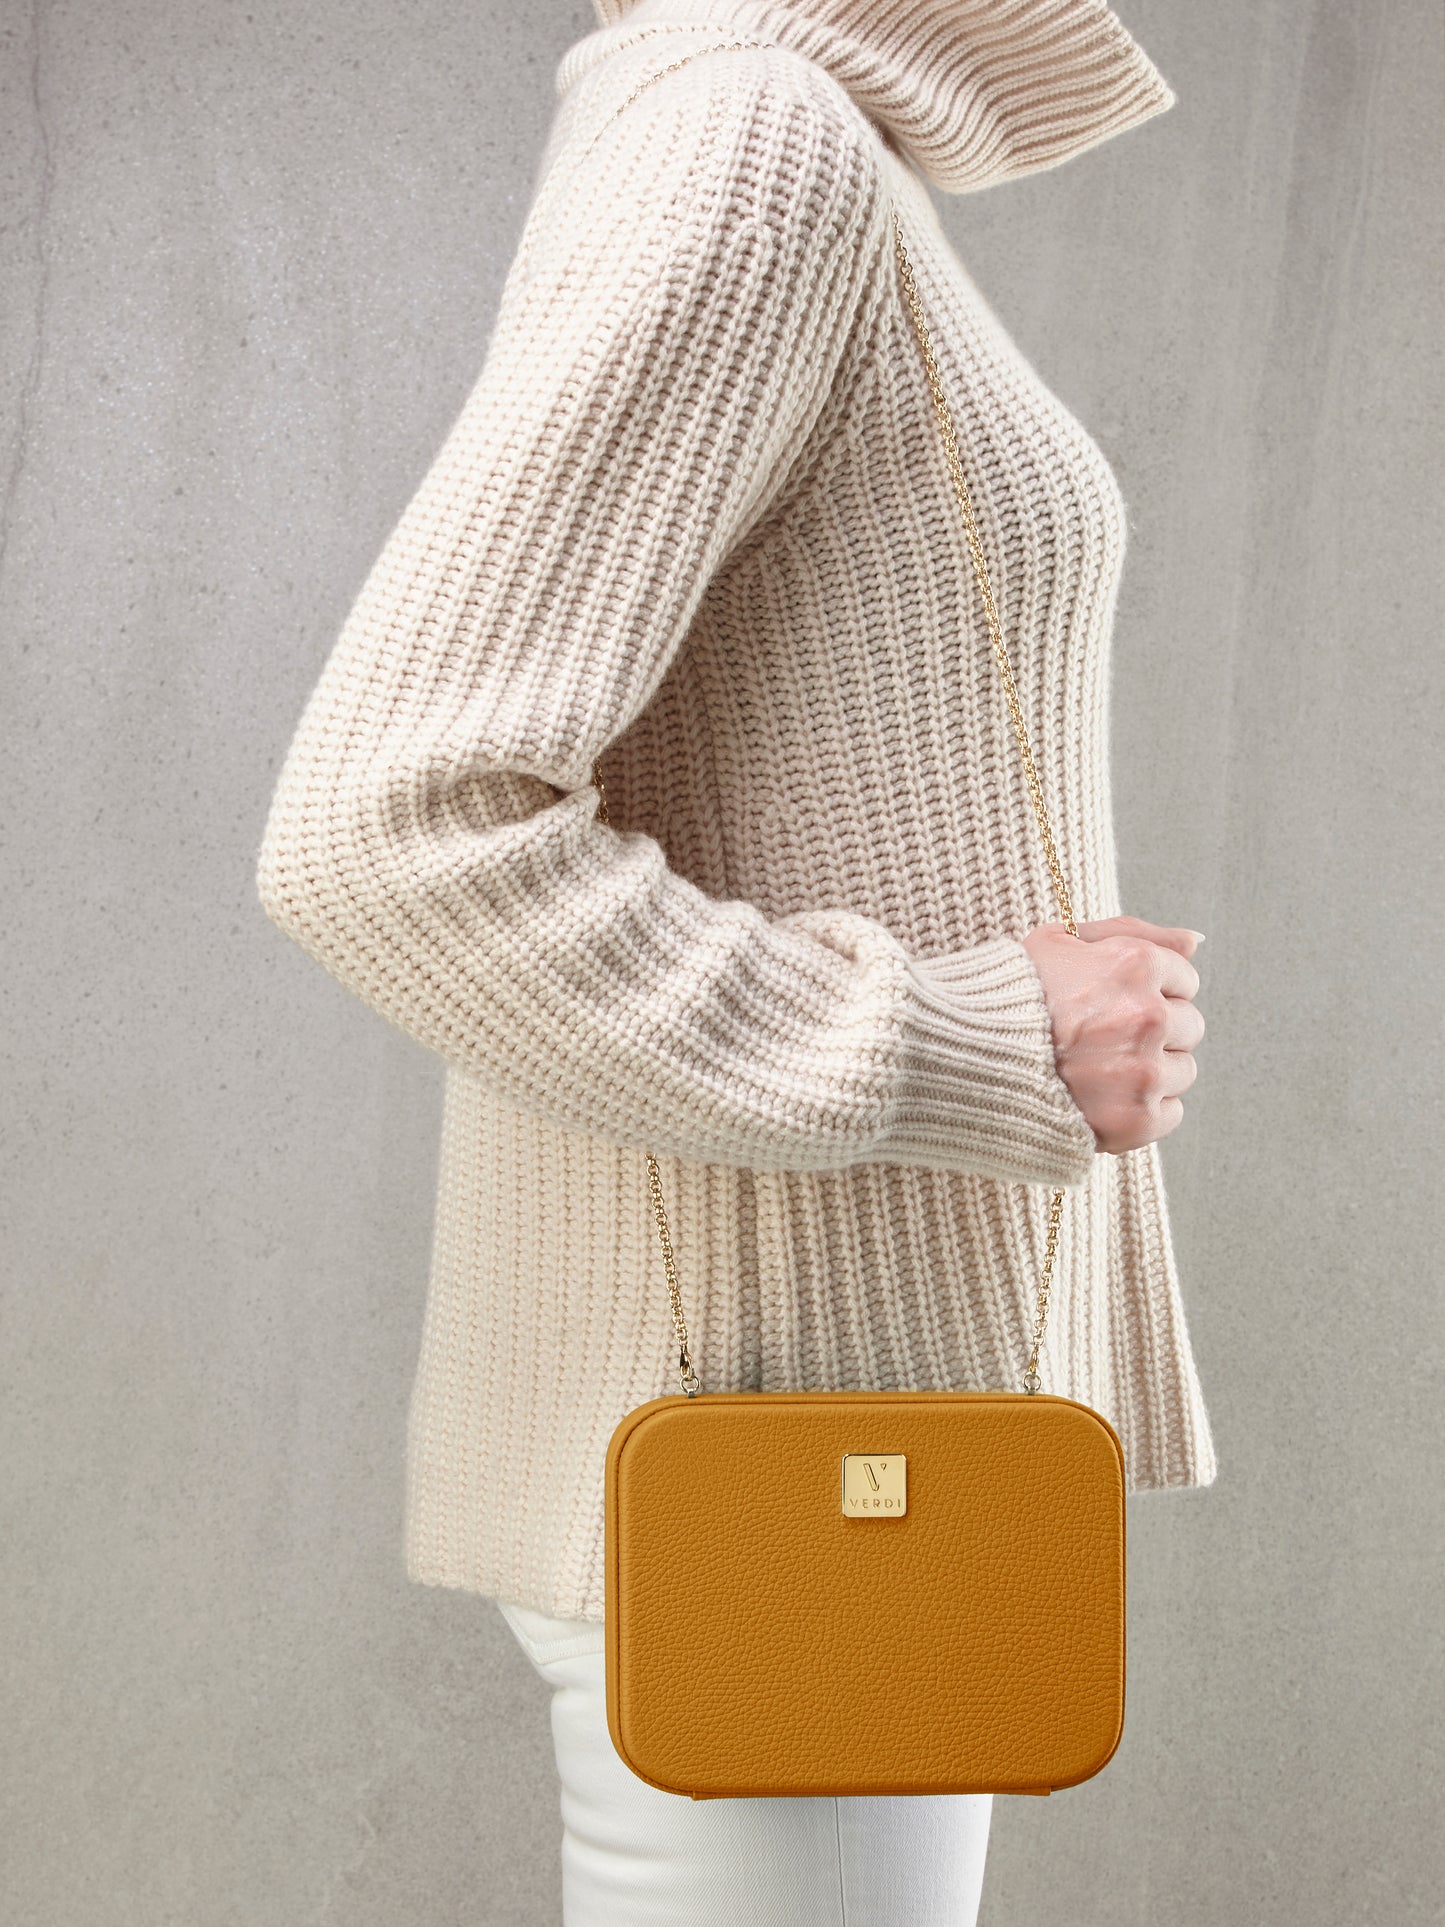 Atelier Verdi yellow leather clutch bag worn over the shoulder by model